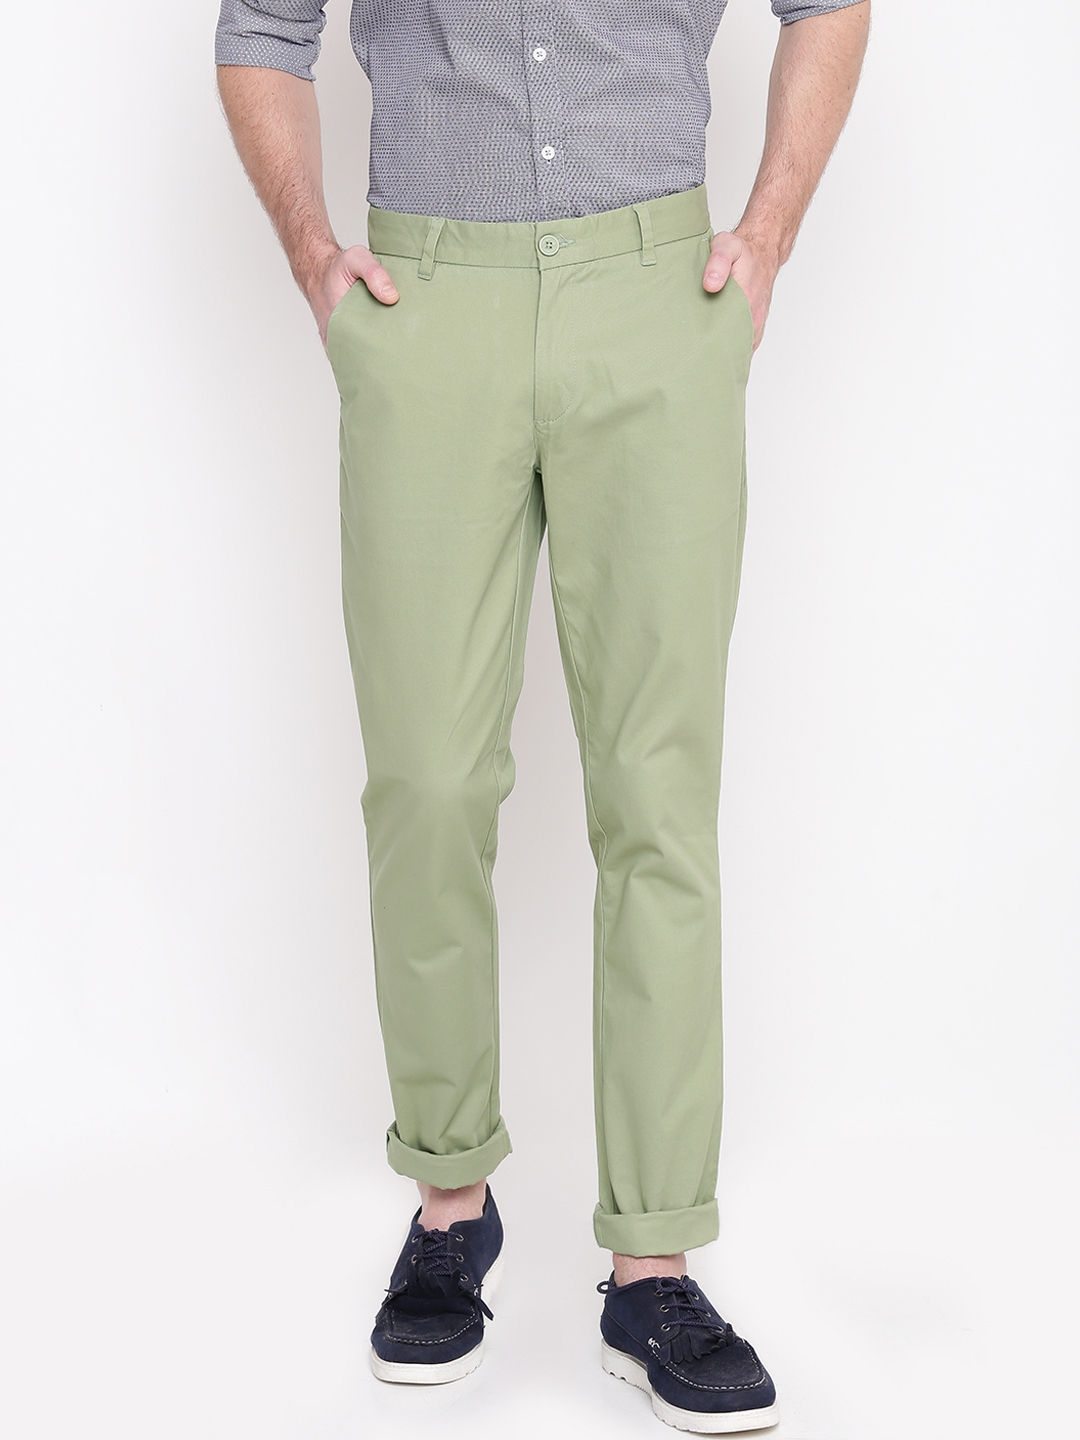 Boys United Colors Of Benetton Trousers  Buy Boys United Colors Of  Benetton Trousers online in India